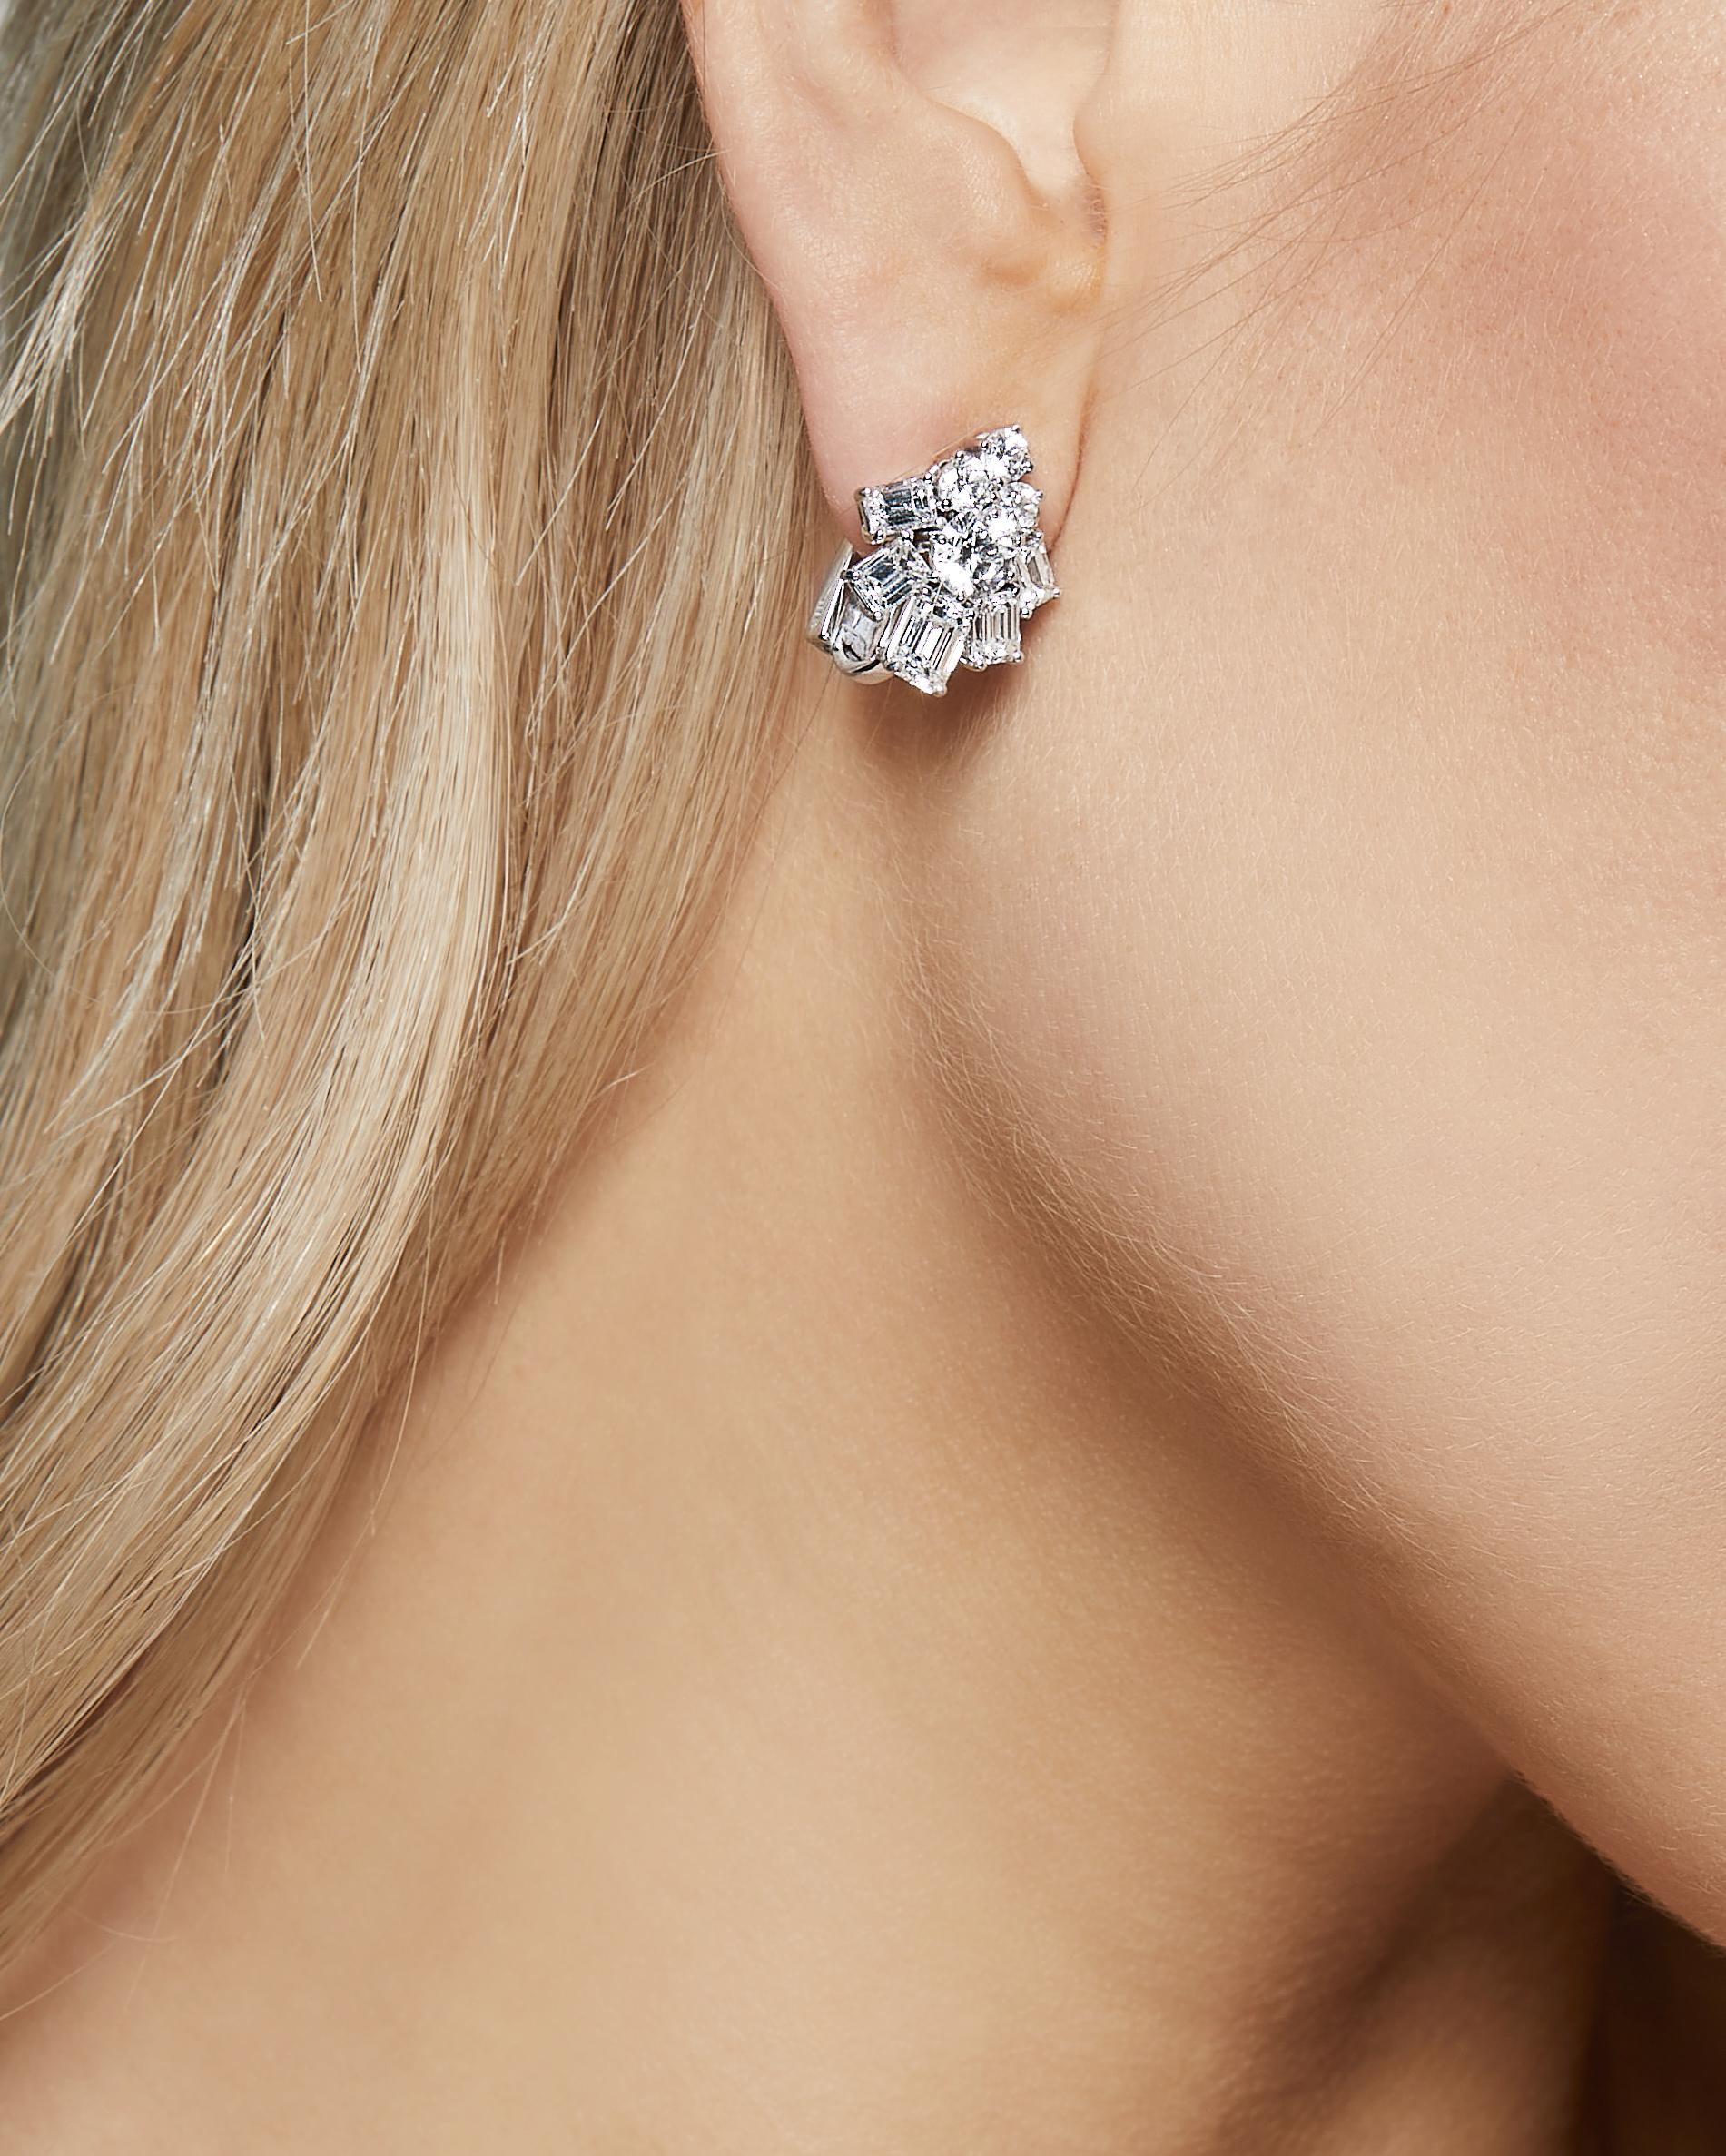 Introducing the stunning Graff White Gold and Platinum Earrings, adorned with emerald-cut and round diamonds to create a mesmerizing display of brilliance and sophistication.

 Crafted from the finest white gold and platinum, these earrings feature